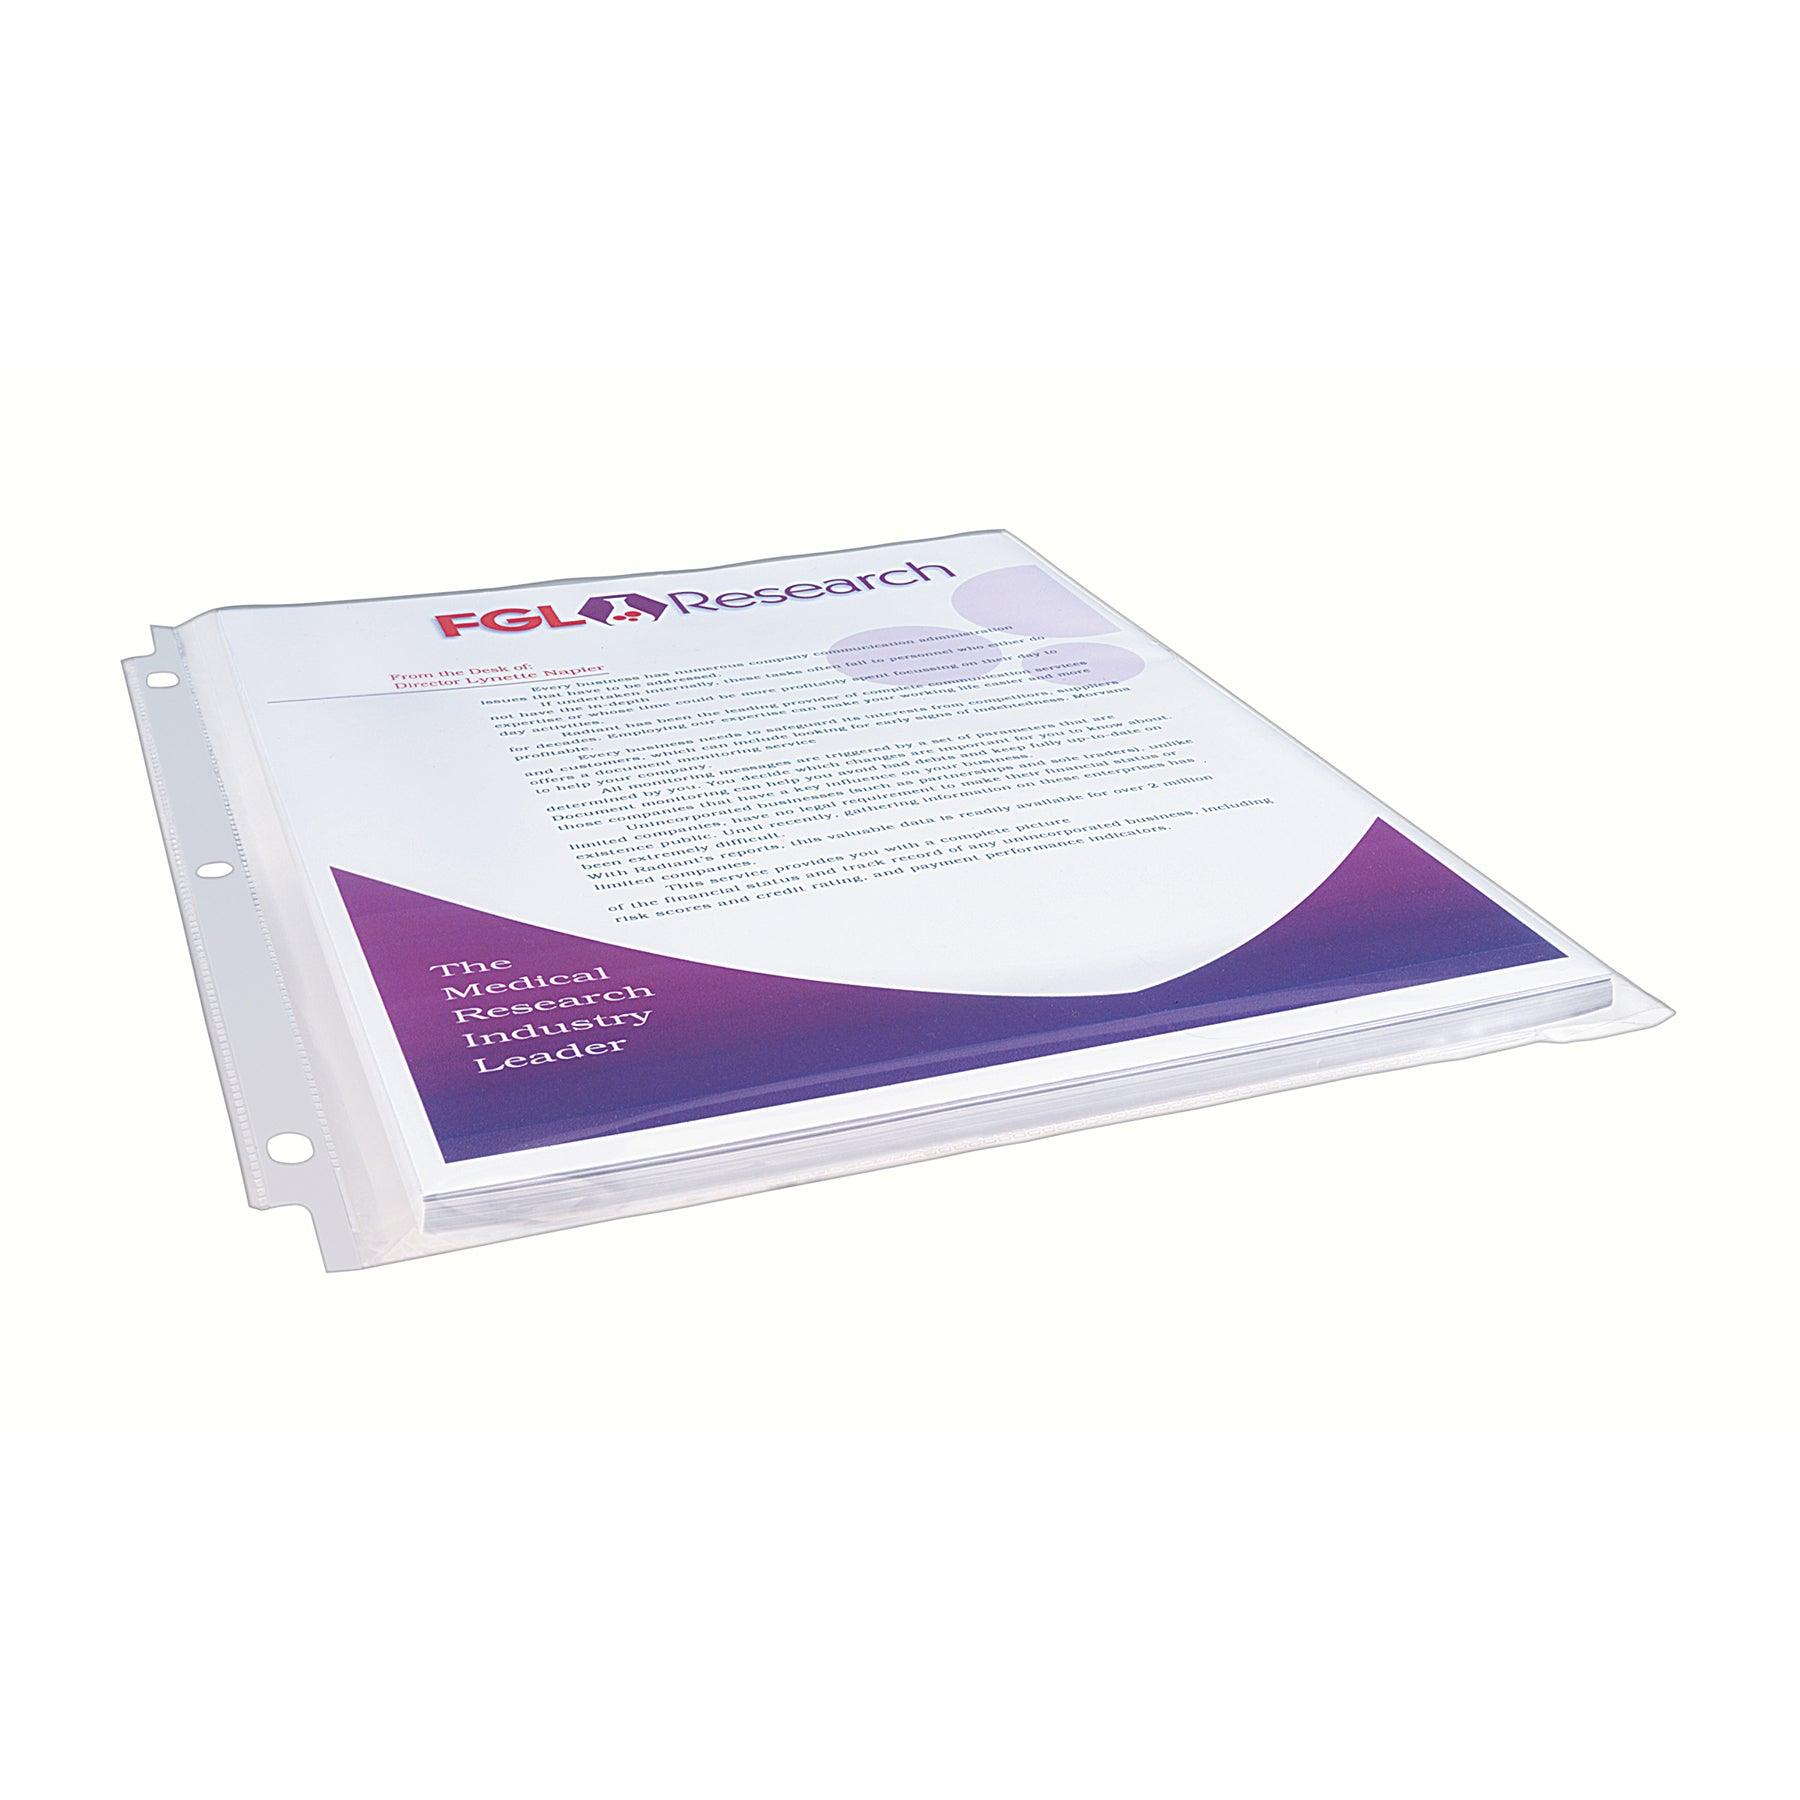 Clear Heavyweight Multi-Page Capacity Sheet Protectors, Holds 8-1/2" x 11" Sheets, Top Load, 25 Per Pack, 3 Packs - Loomini